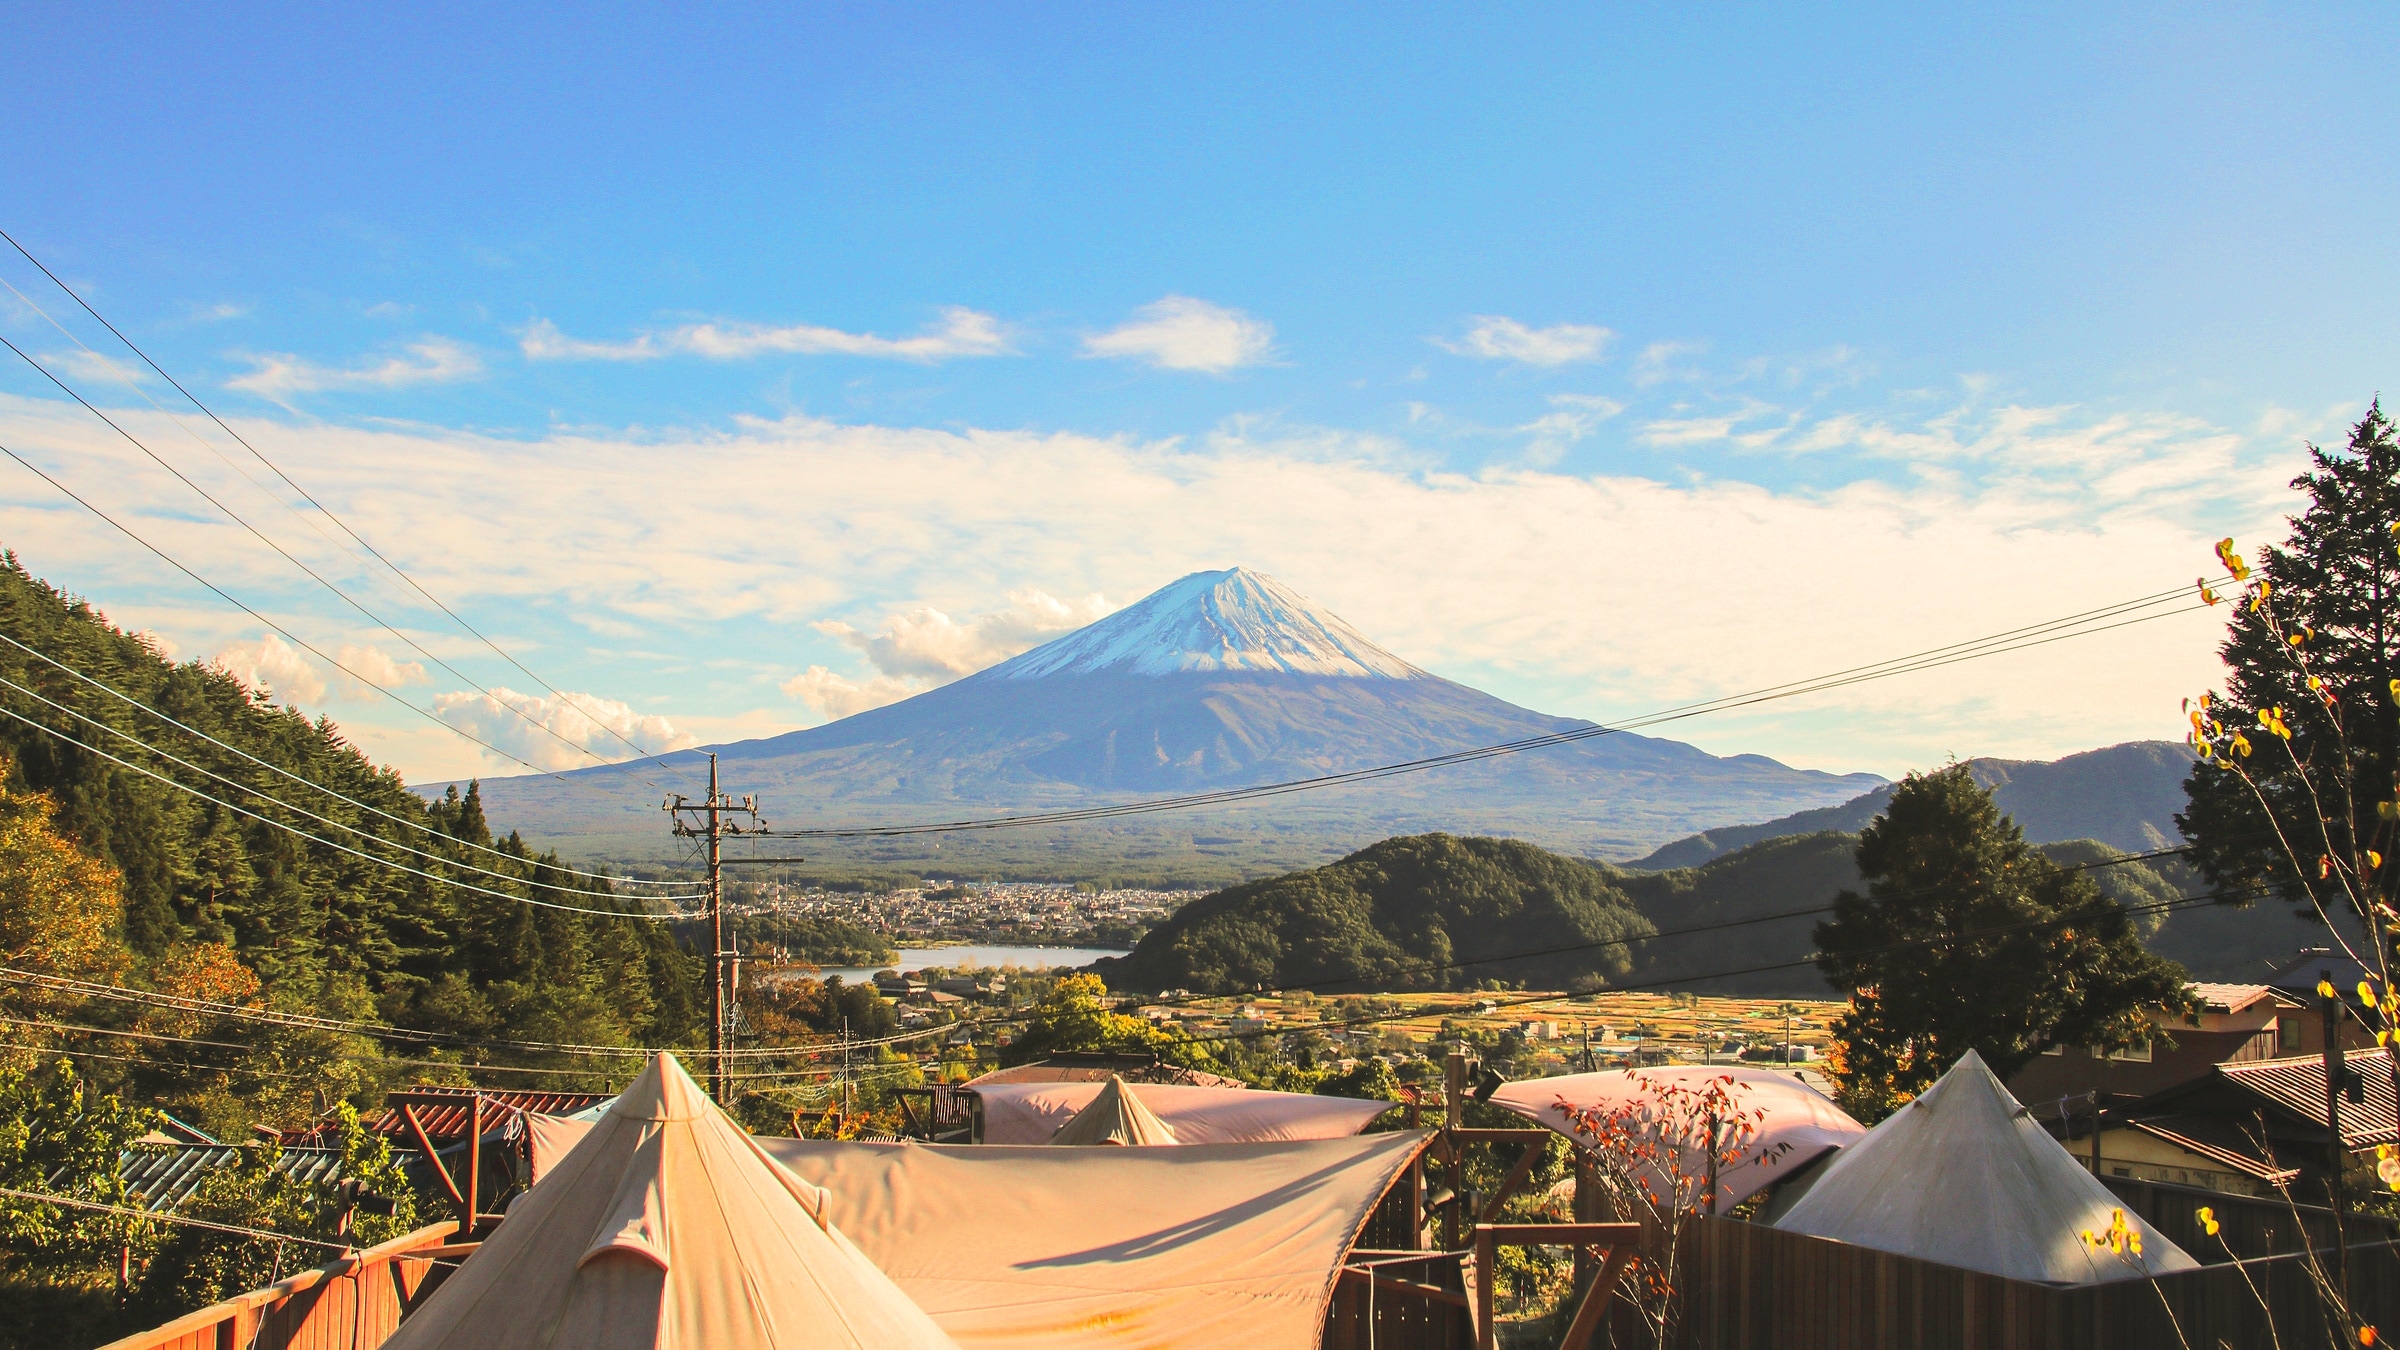 Fuji seen from the glamping facility.